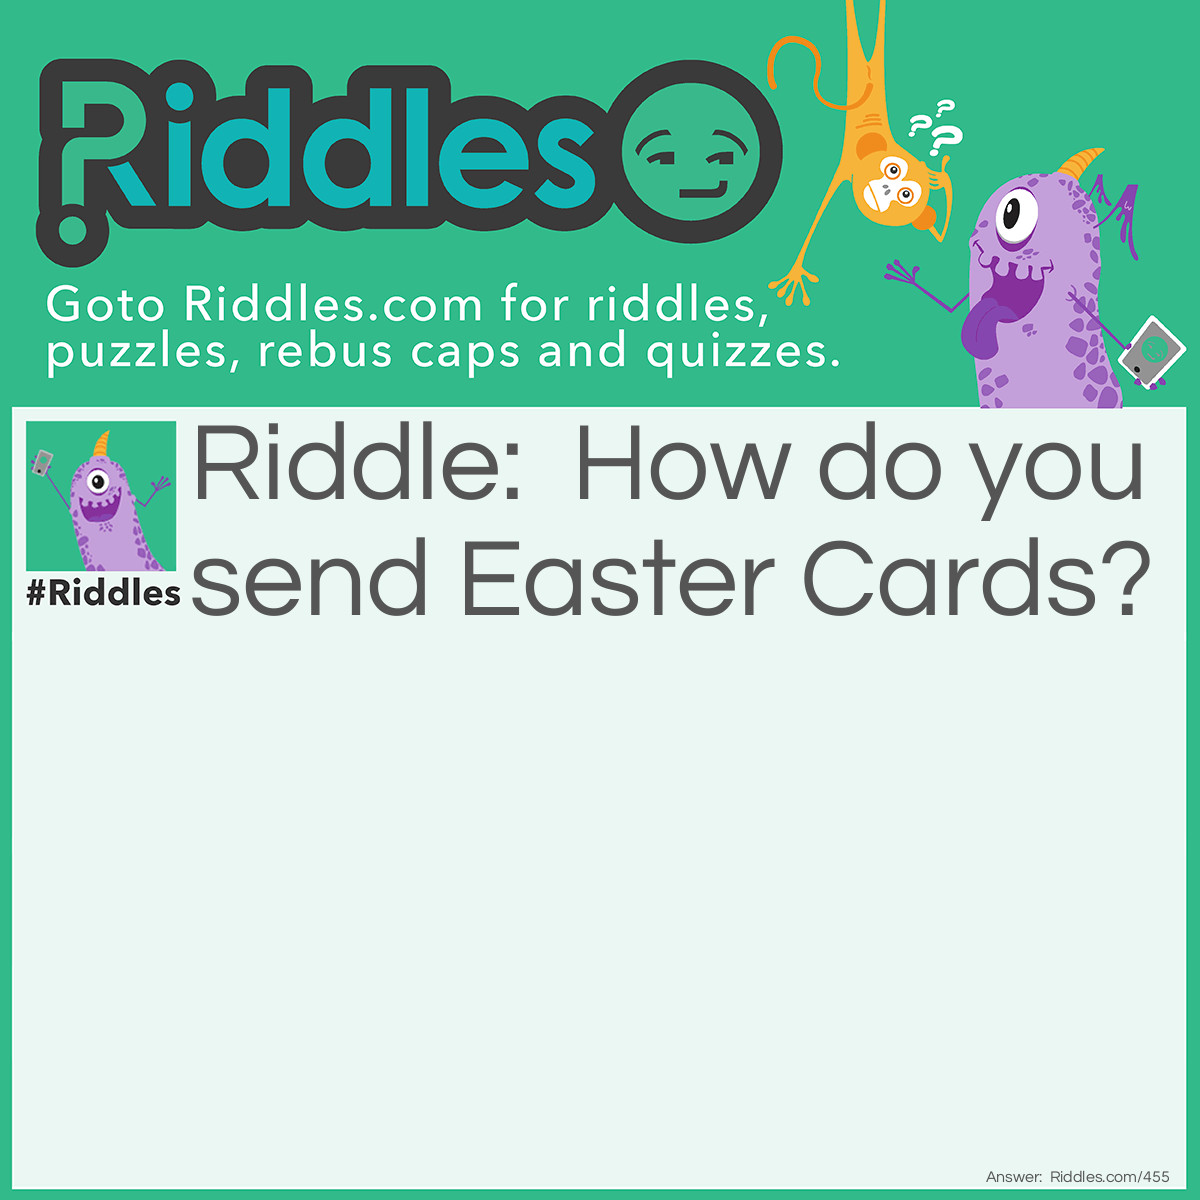 Riddle: How do you send <a href="https://www.riddles.com/quiz/easter-riddles">Easter</a> Cards? Answer: By hare mail!